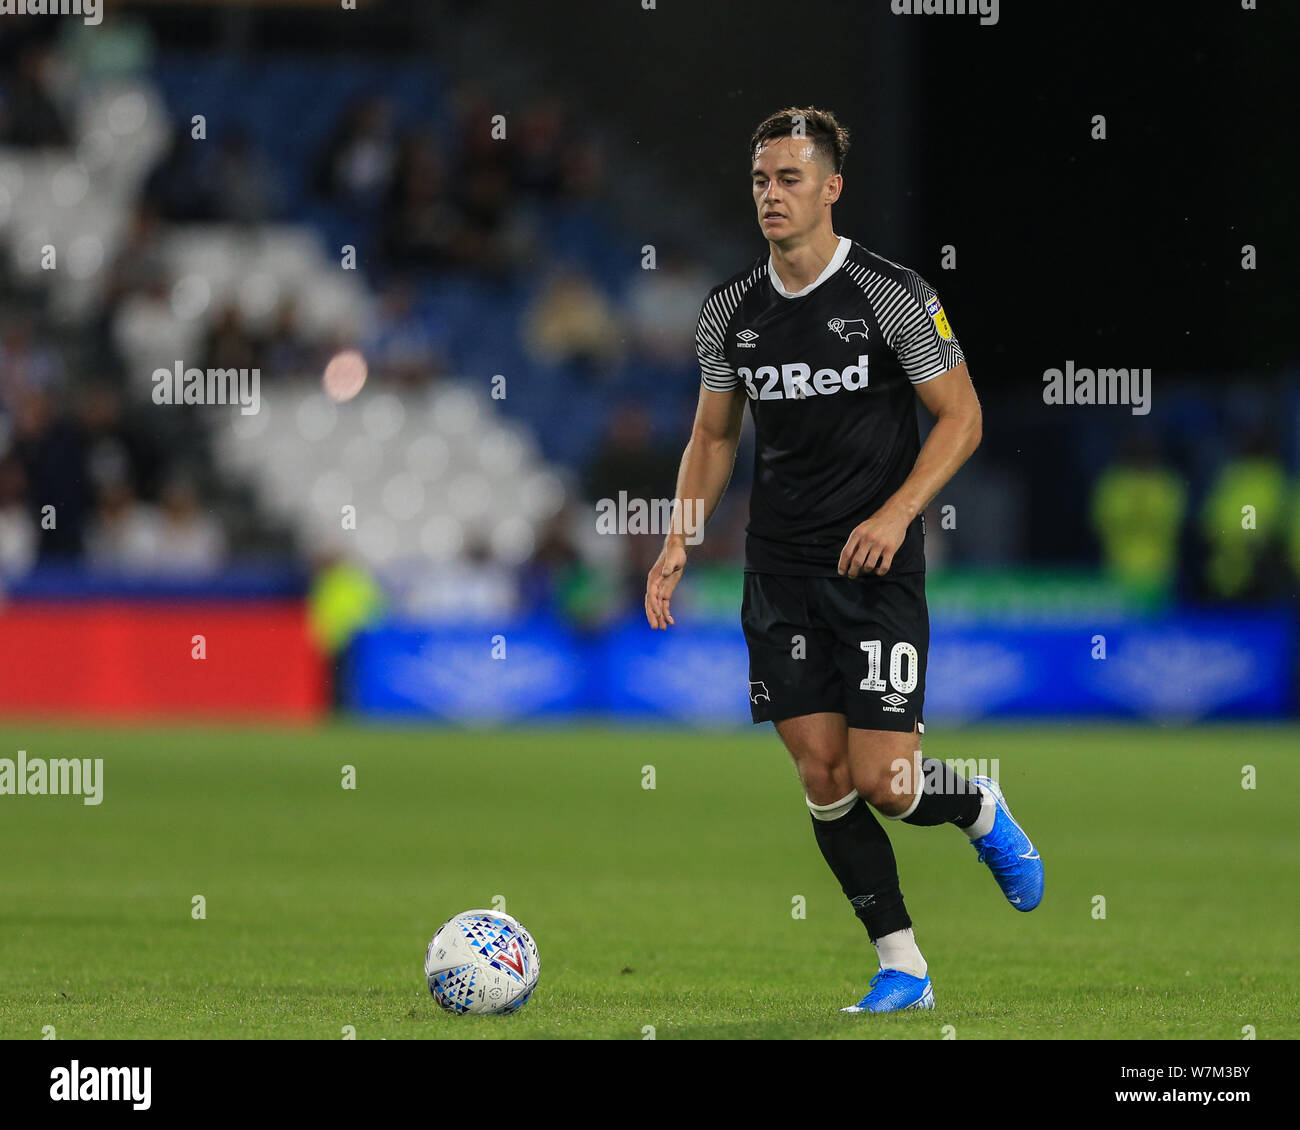 5th August 2019, John Smiths Stadium, Huddersfield England; Sky Bet Championship, Huddersfield Town vs Derby County ; Tom Lawrence (10) of Derby County during the game  Credit: Mark Cosgrove/News Images  English Football League images are subject to DataCo Licence Stock Photo